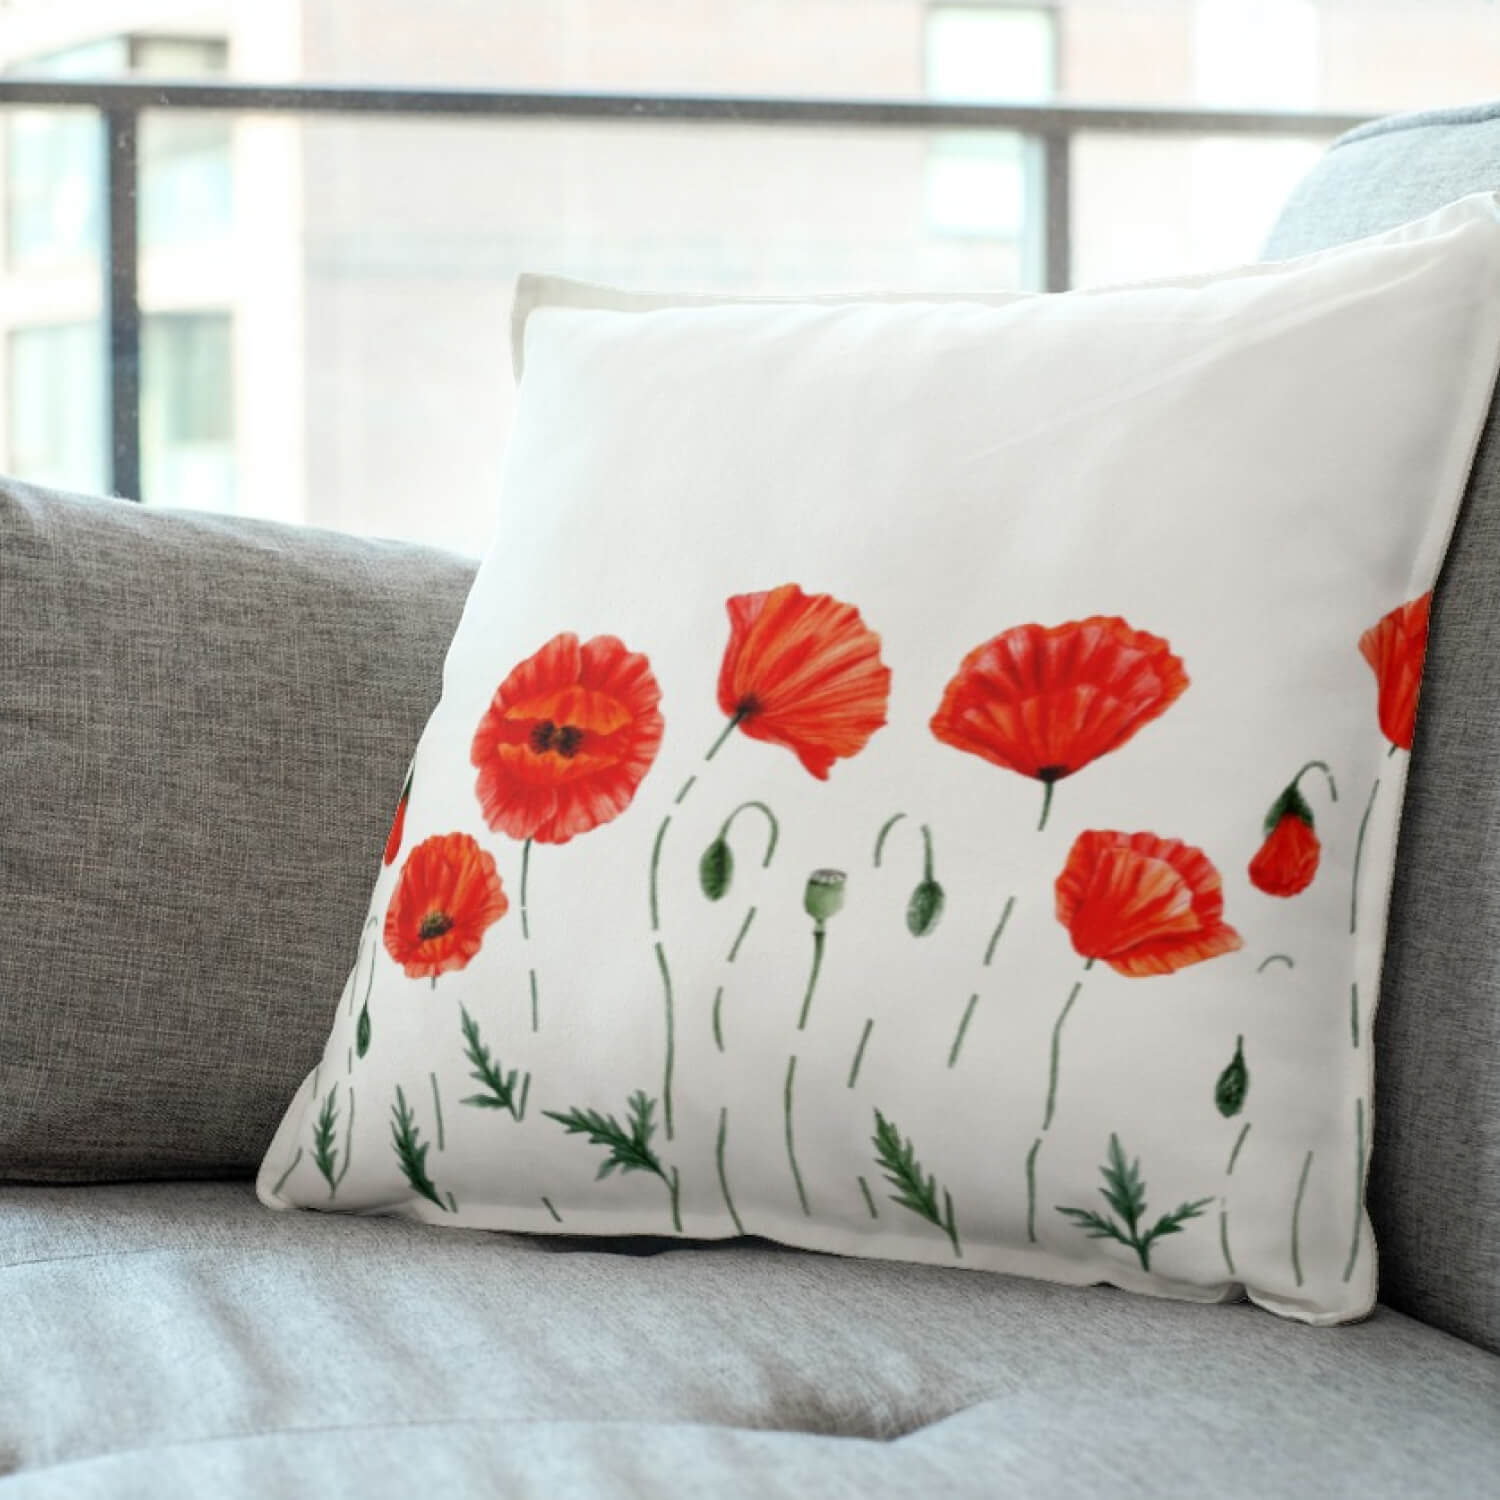 Poppies on the Pillow.